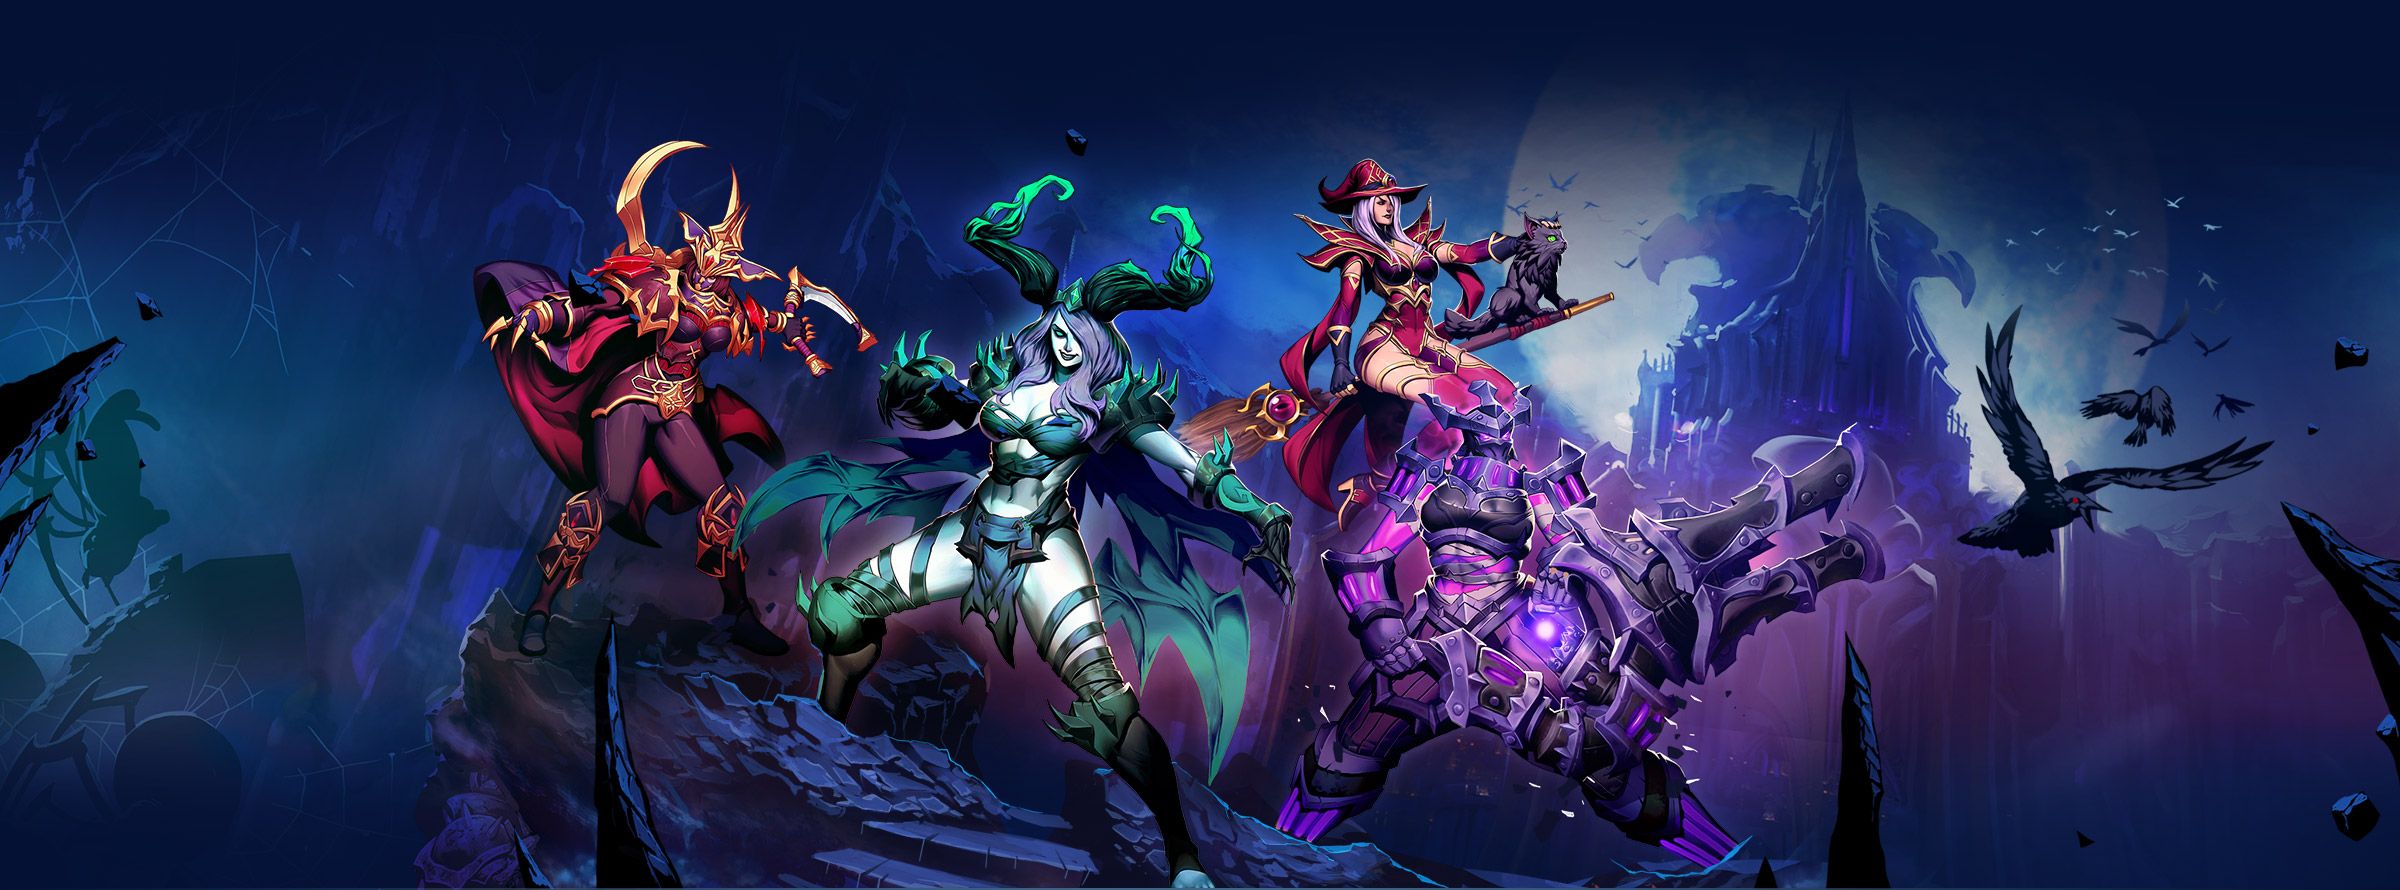 Heroes Of The Storm Fall Of King's Crest - HD Wallpaper 